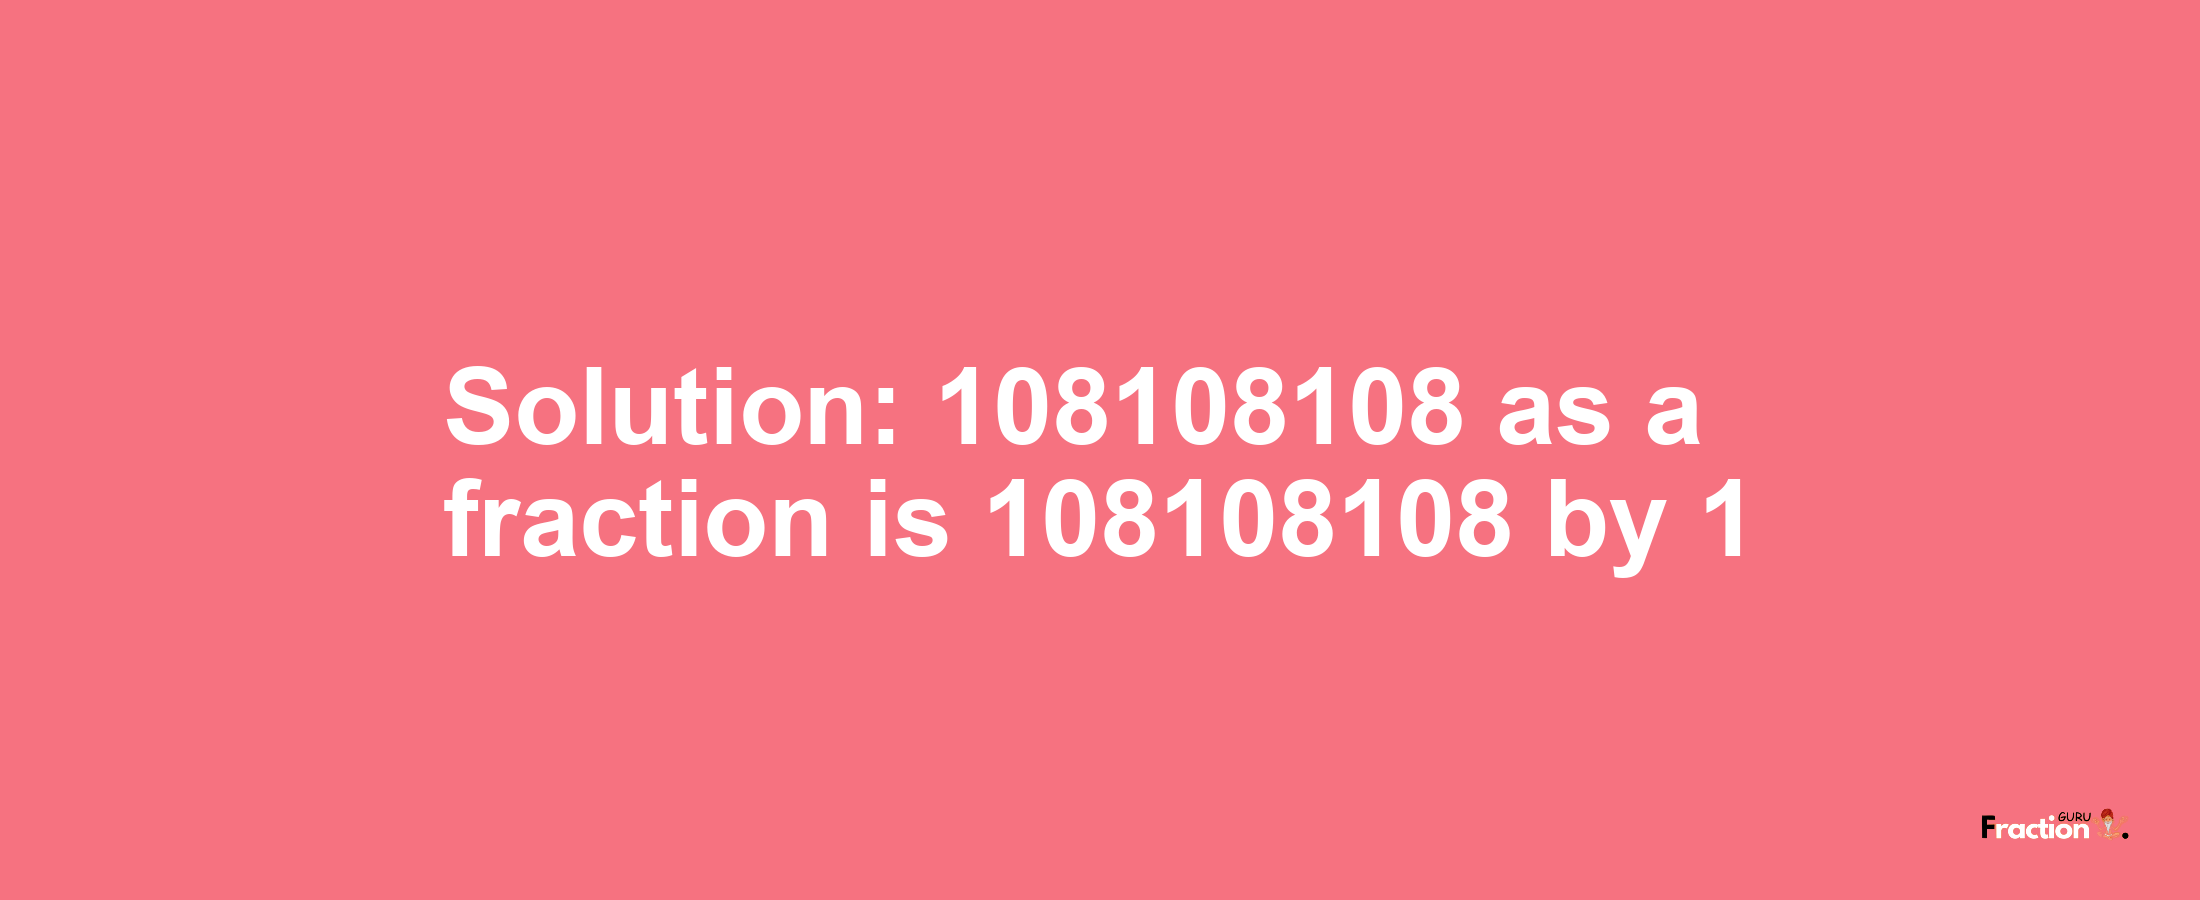 Solution:108108108 as a fraction is 108108108/1